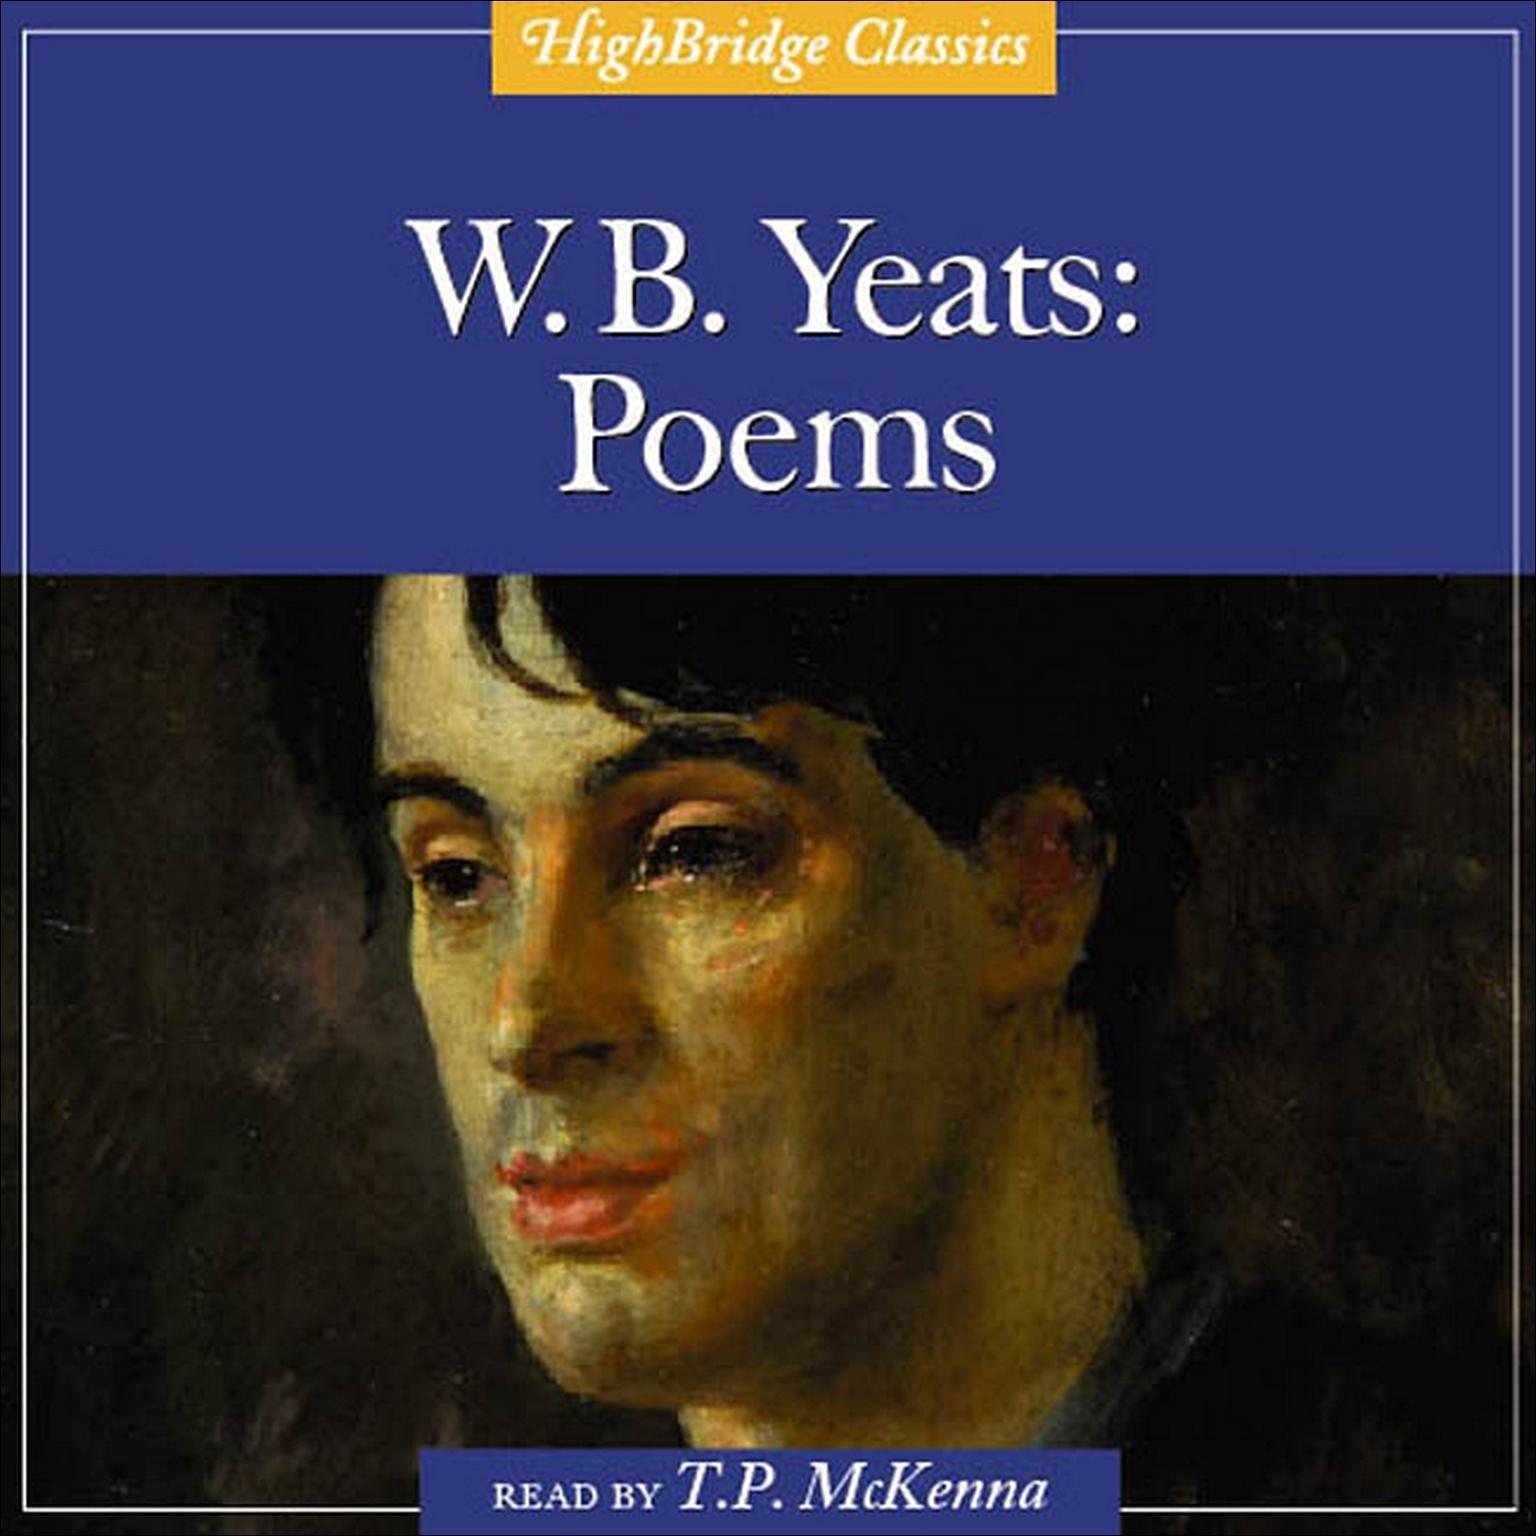 W. B. Yeats: Poems Audiobook, by William Butler Yeats